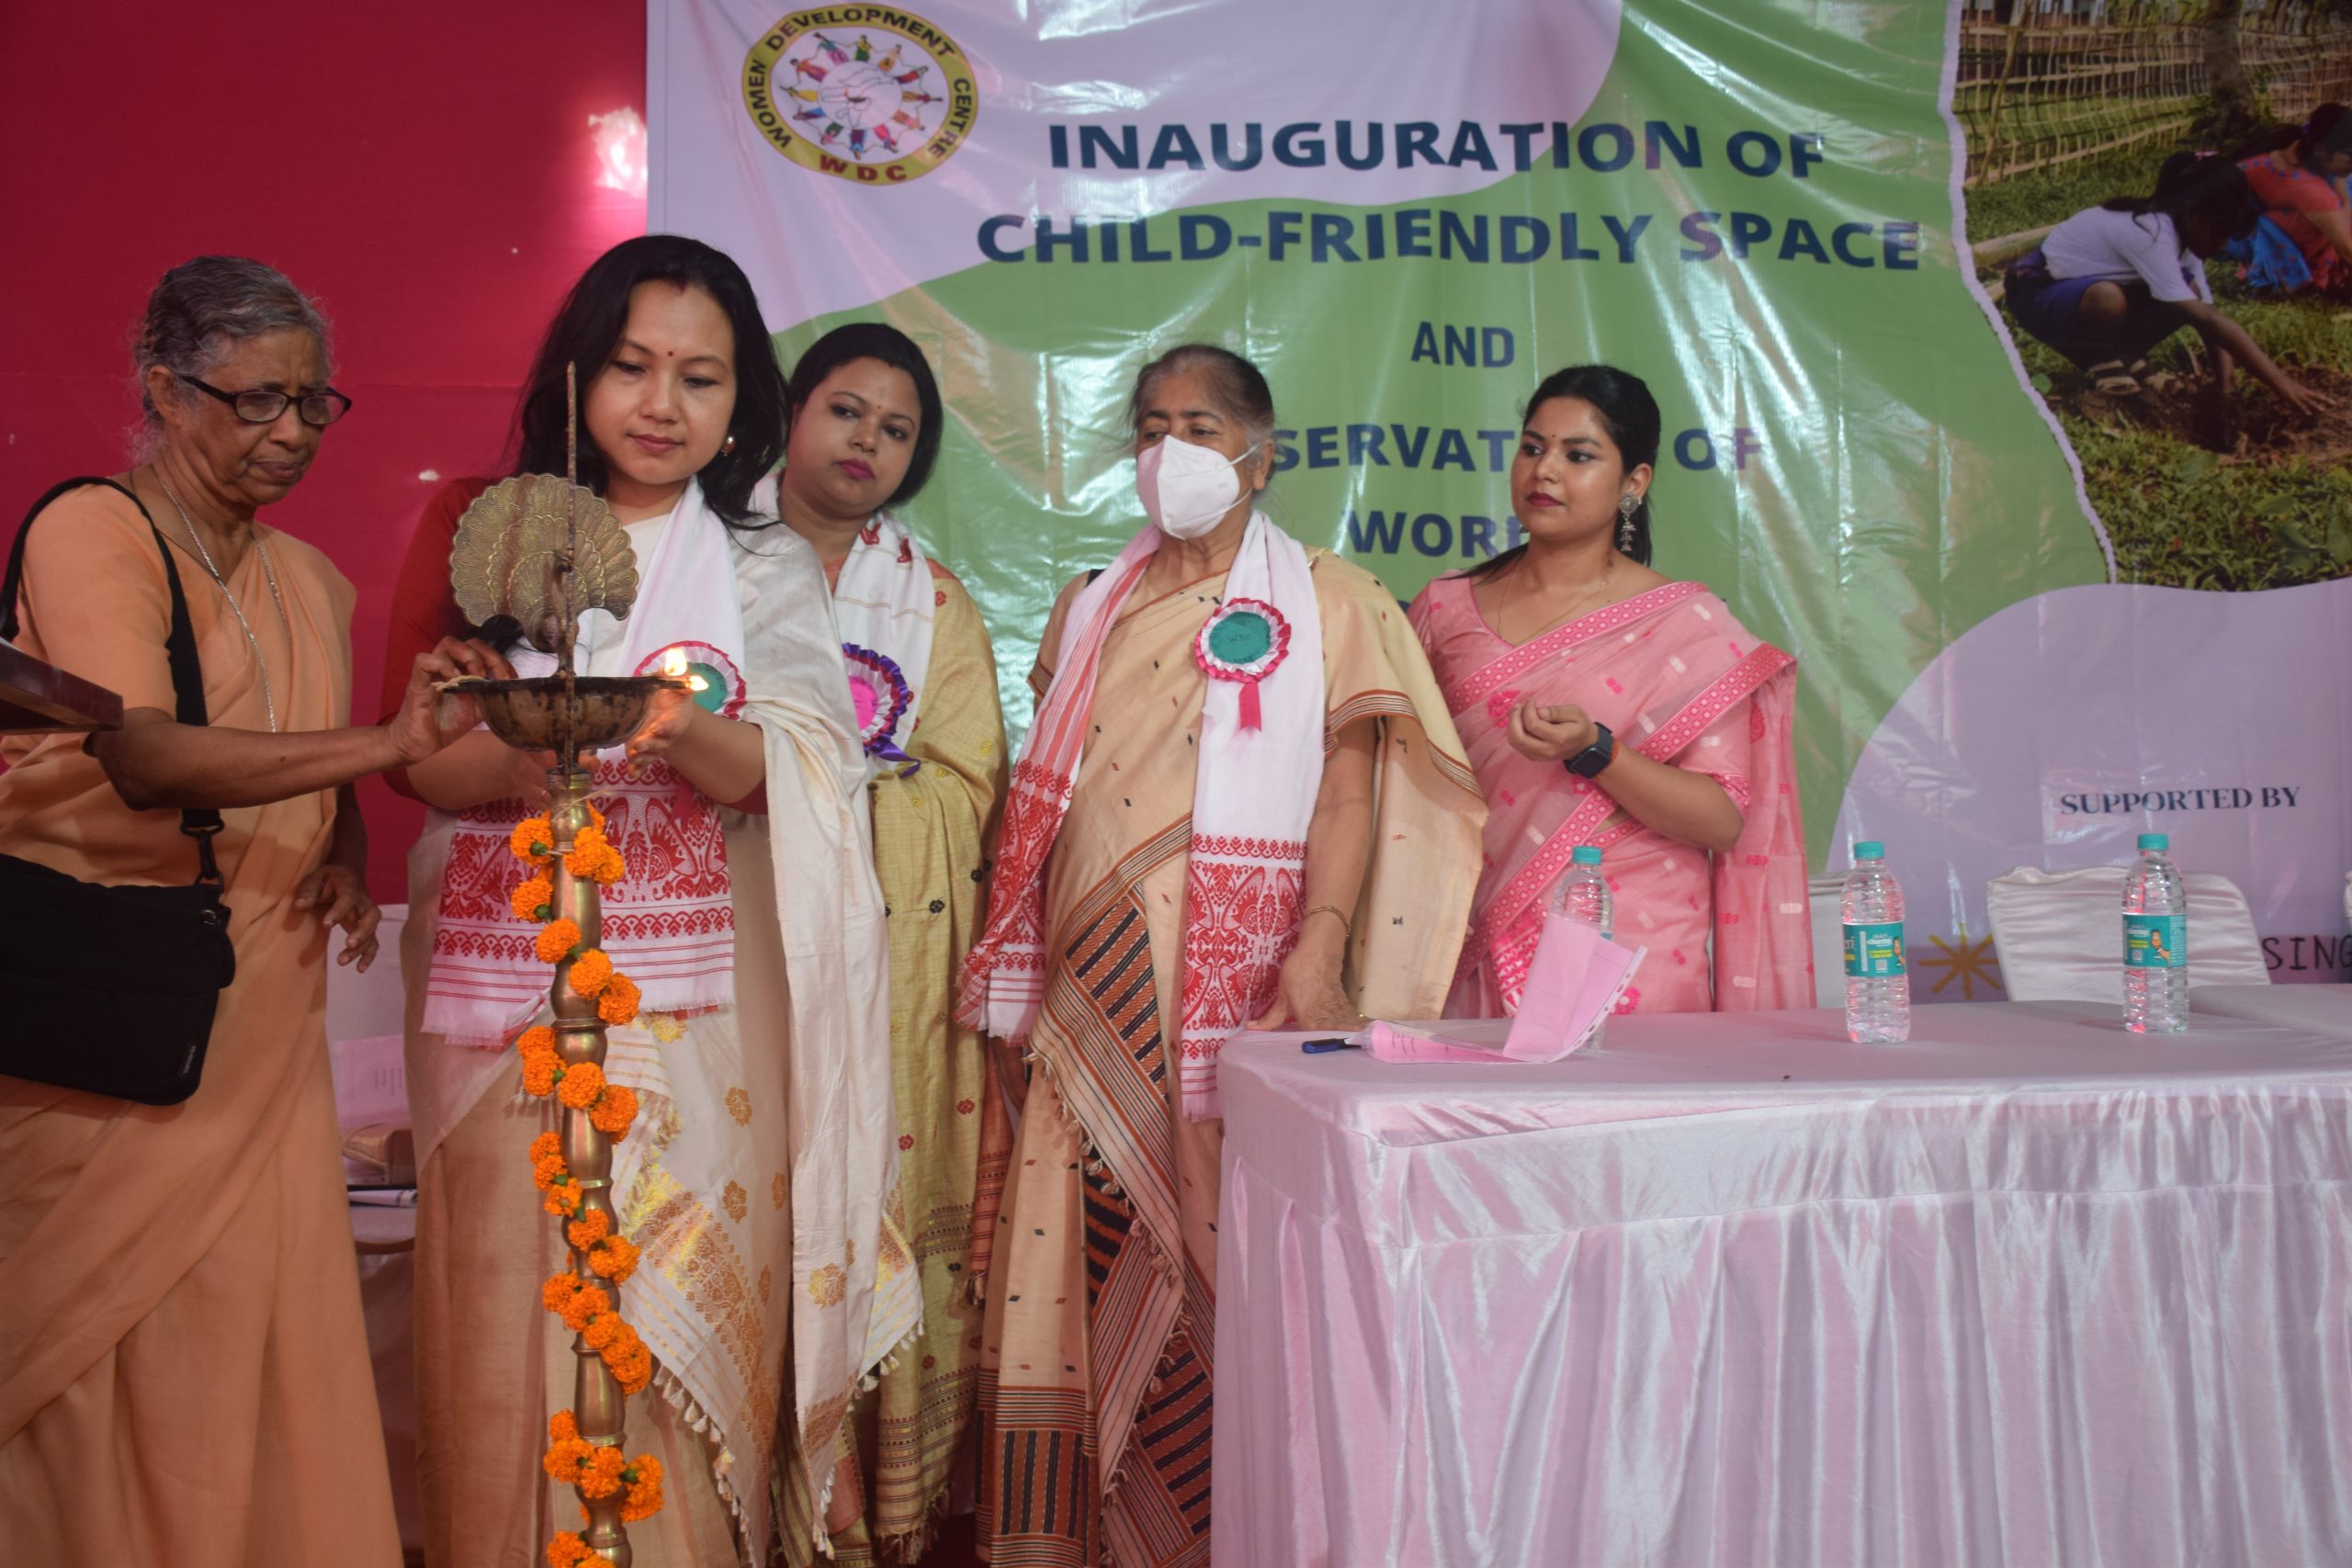 Women Development Centre has launched the first Child-Friendly Space at the Solapara slum on 05th June 2022